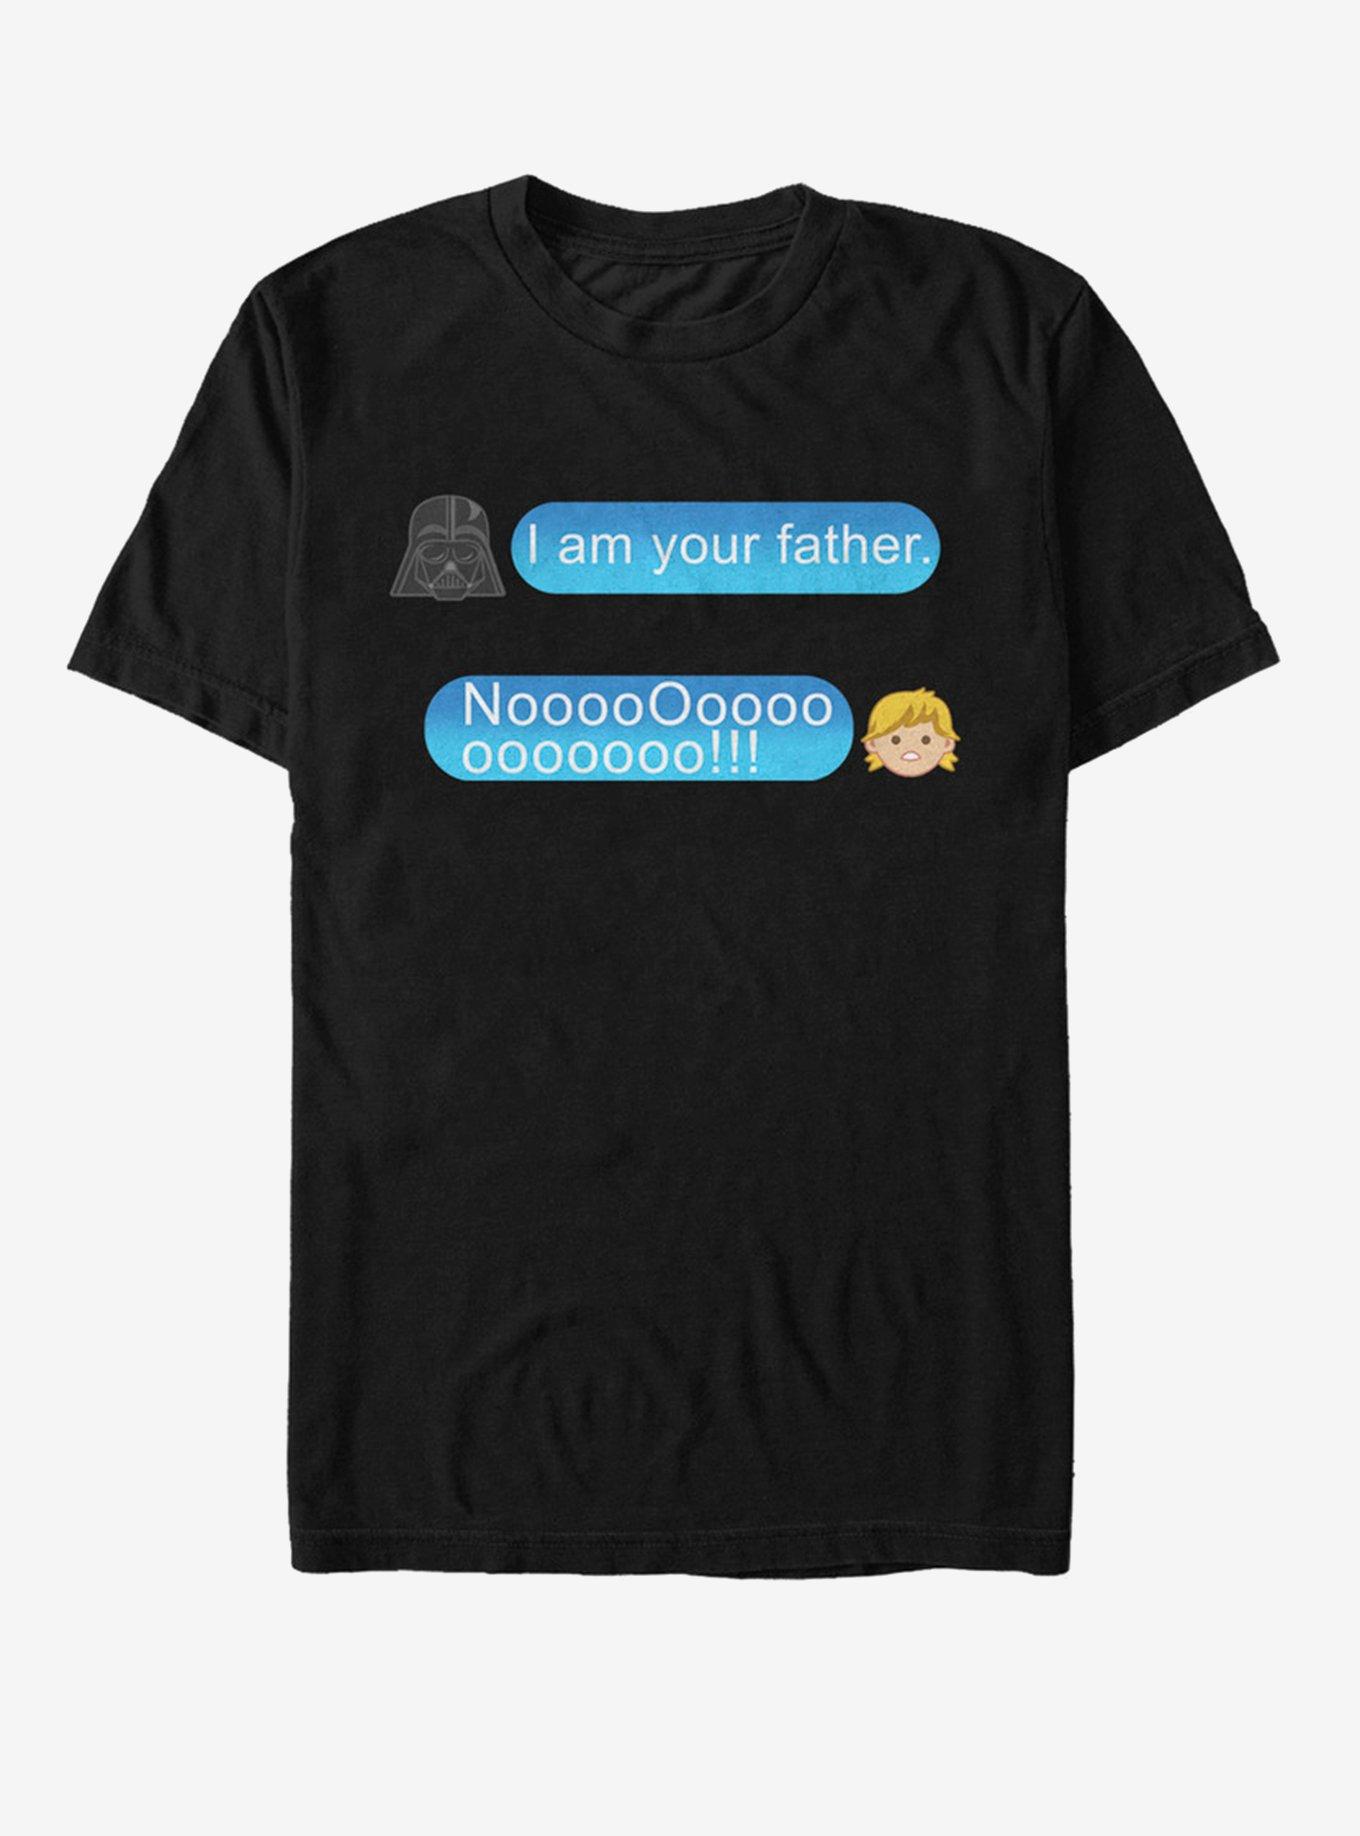 Star Wars Your Father T-Shirt, BLACK, hi-res